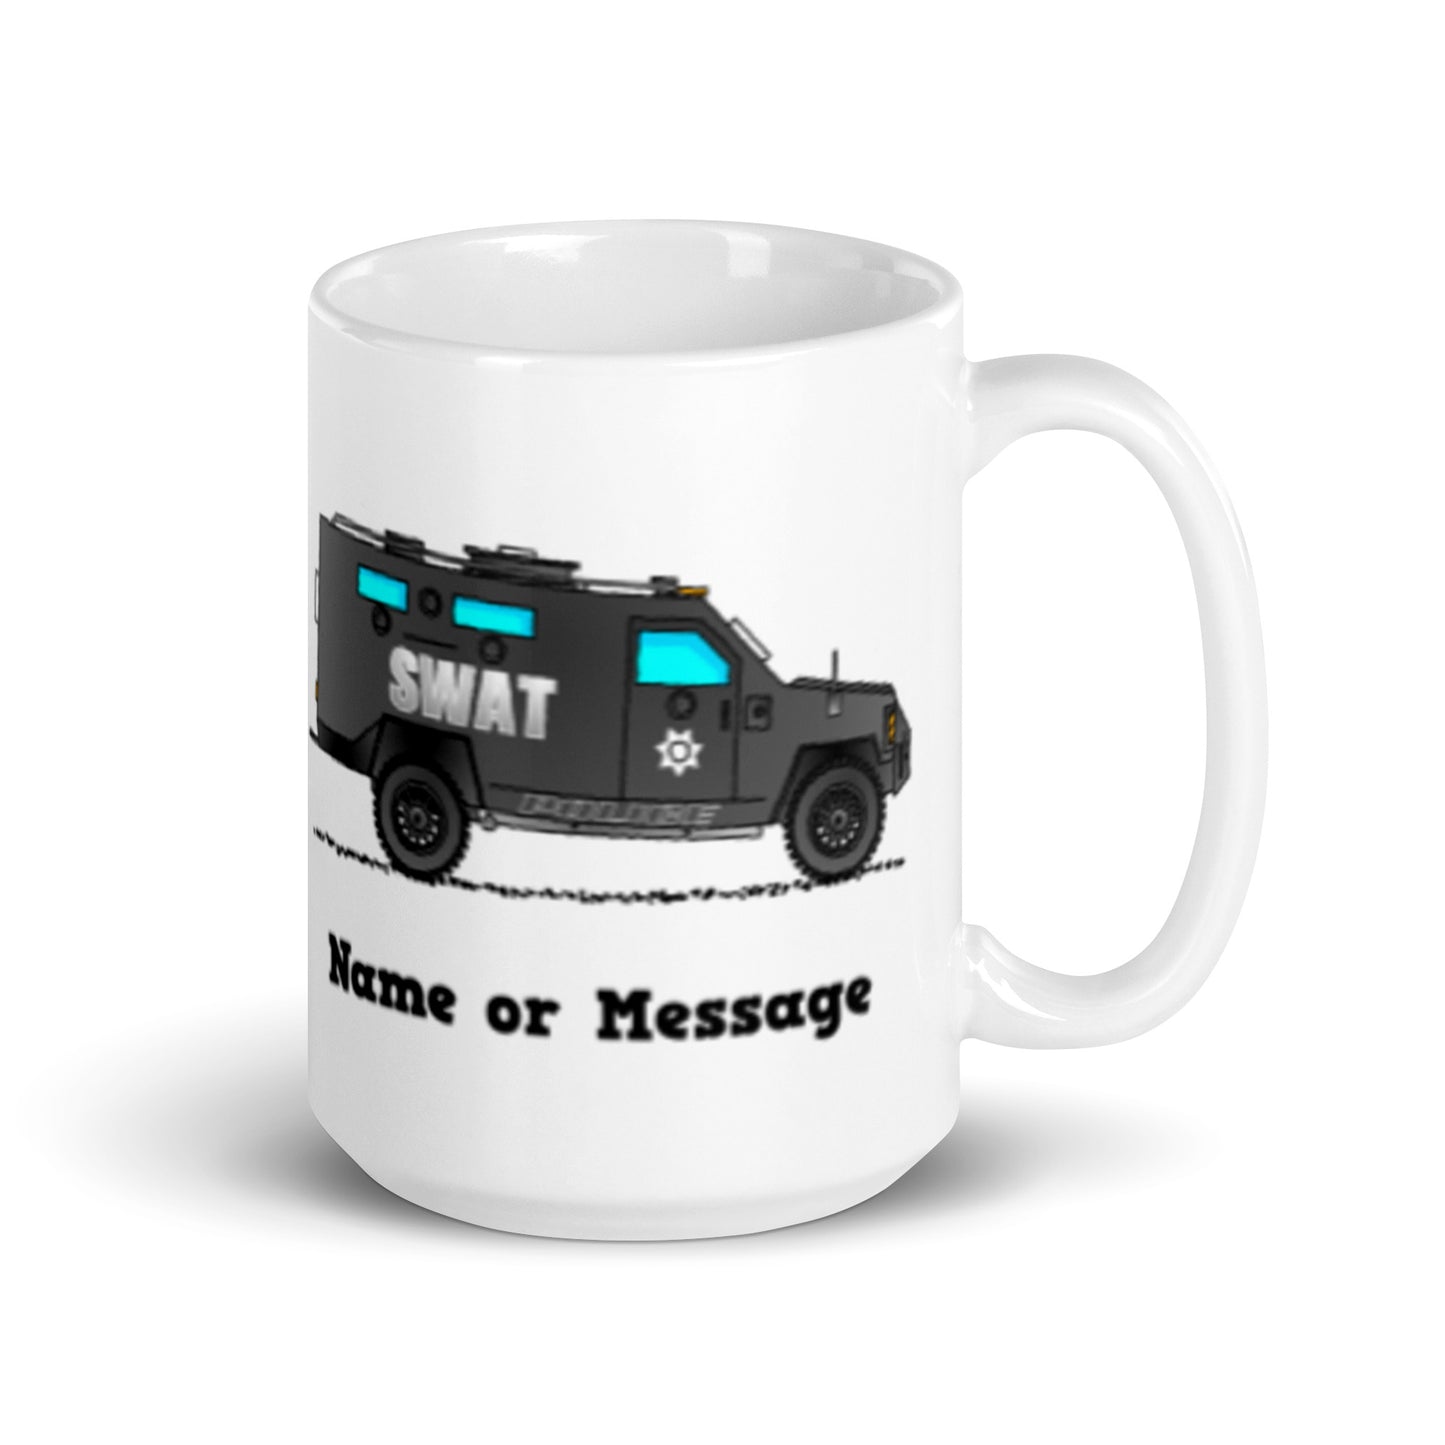 Police SWAT Truck Mug. Personalized Coffee Cup, S.W.A.T. Car Custom Name M056